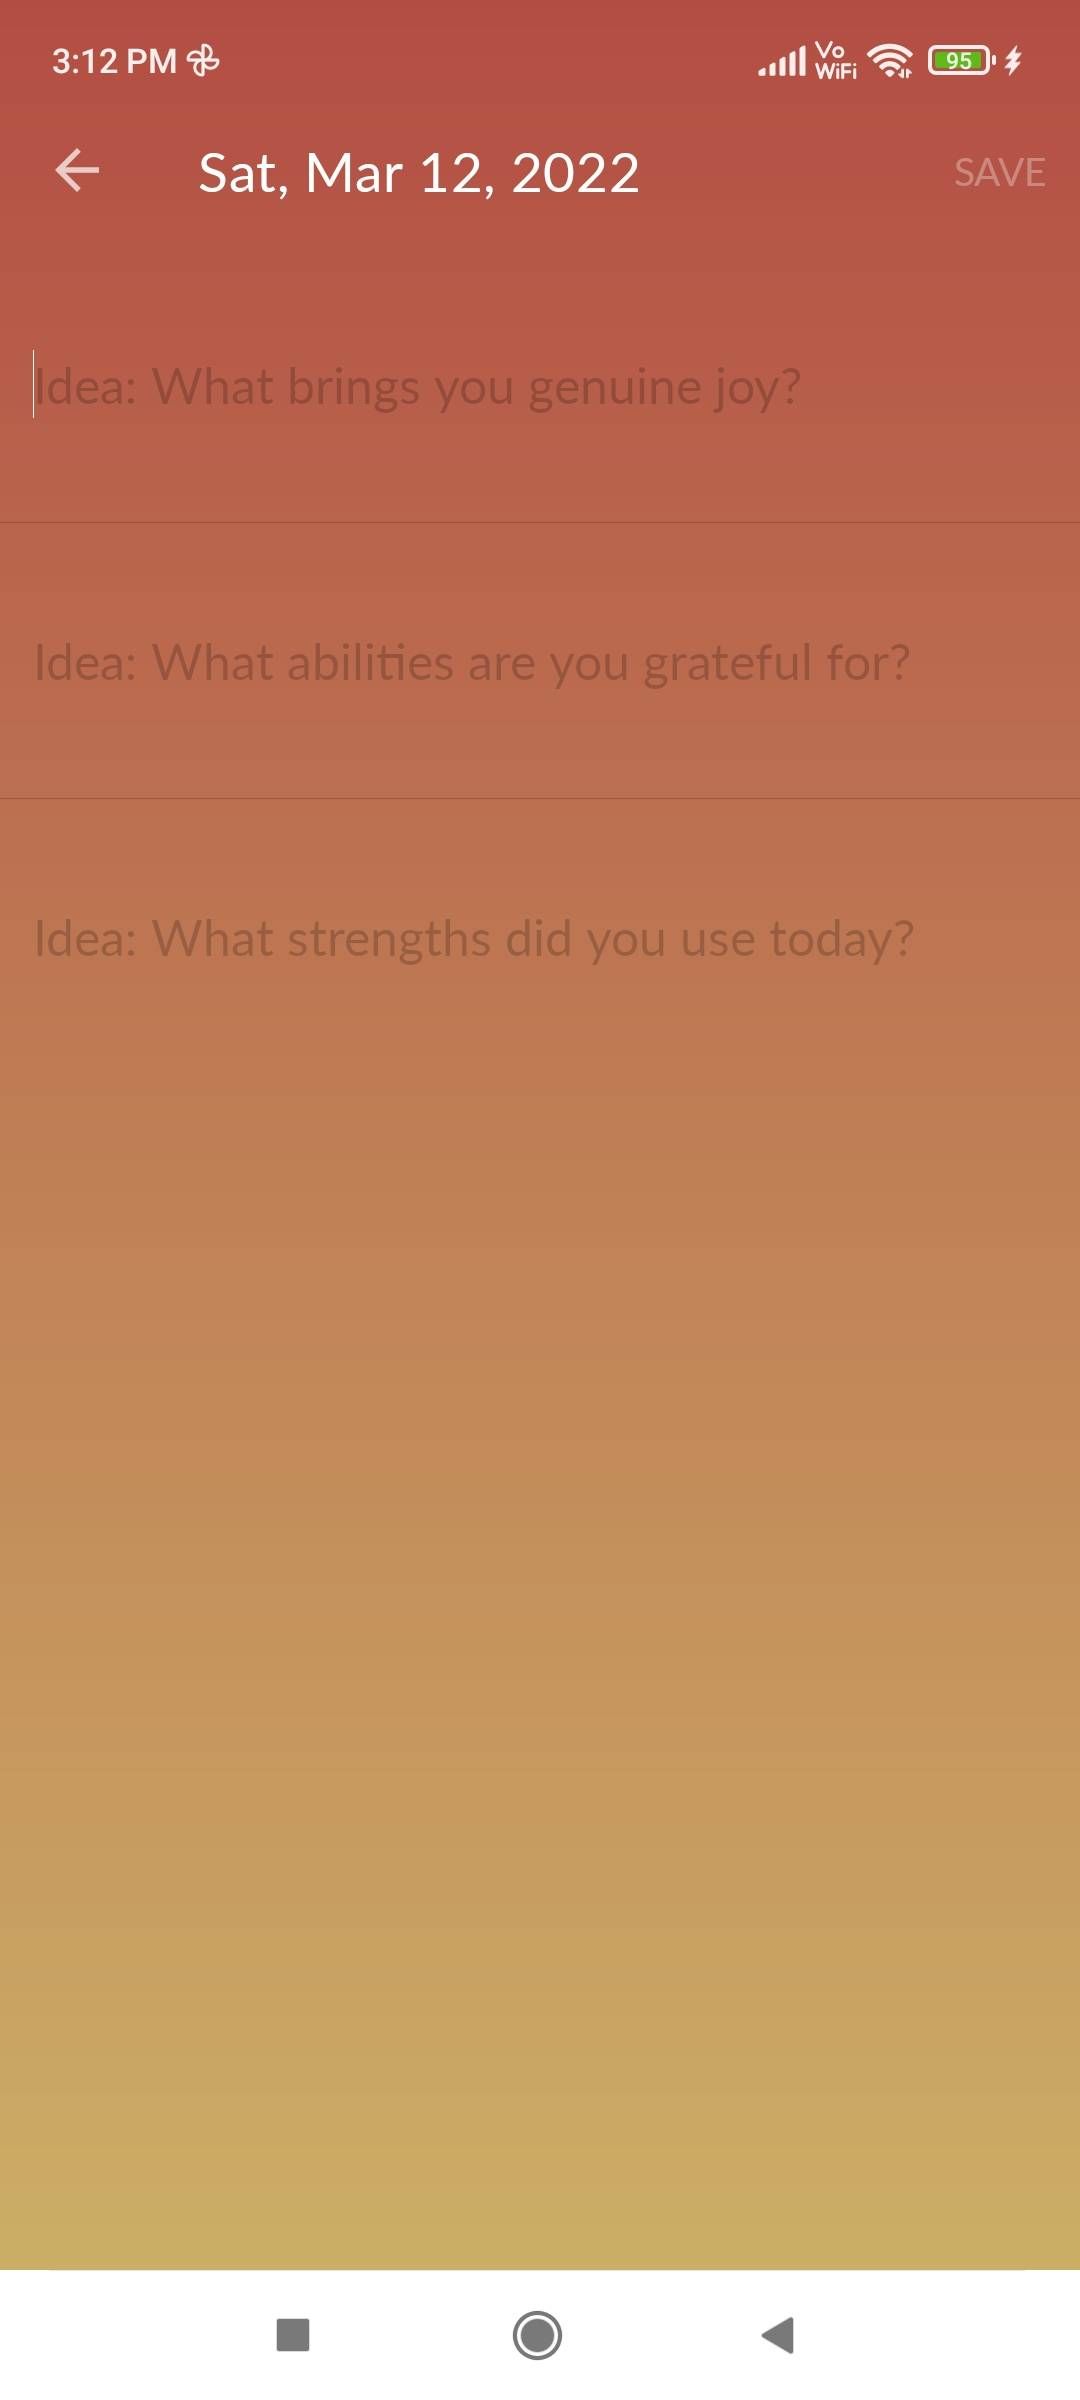 Delightful gives you randomly generated prompts for gratitude journaling inspiration